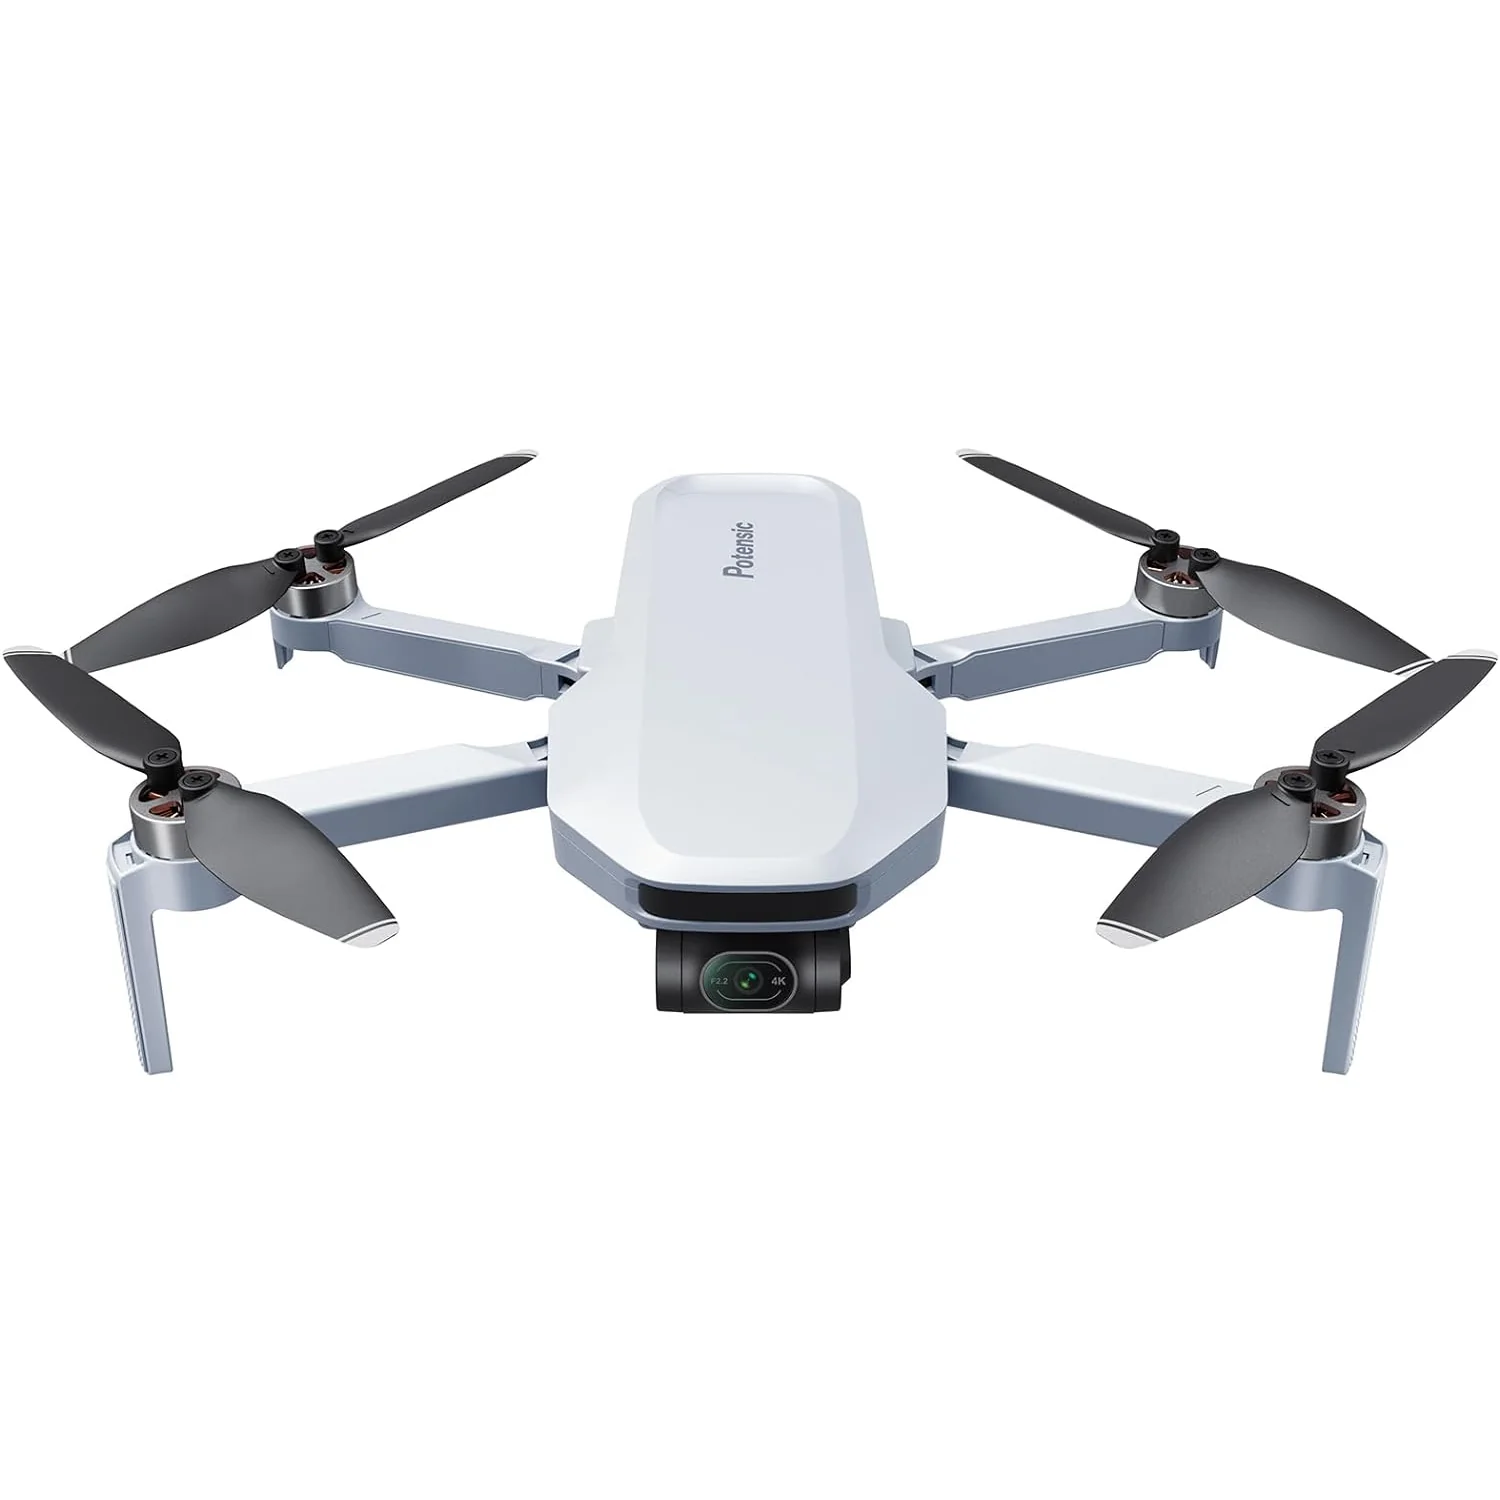 DJI Air 2S Fly More Combo - 5.4K Video 3-Axis Gimbal All-In-One Quadcopter